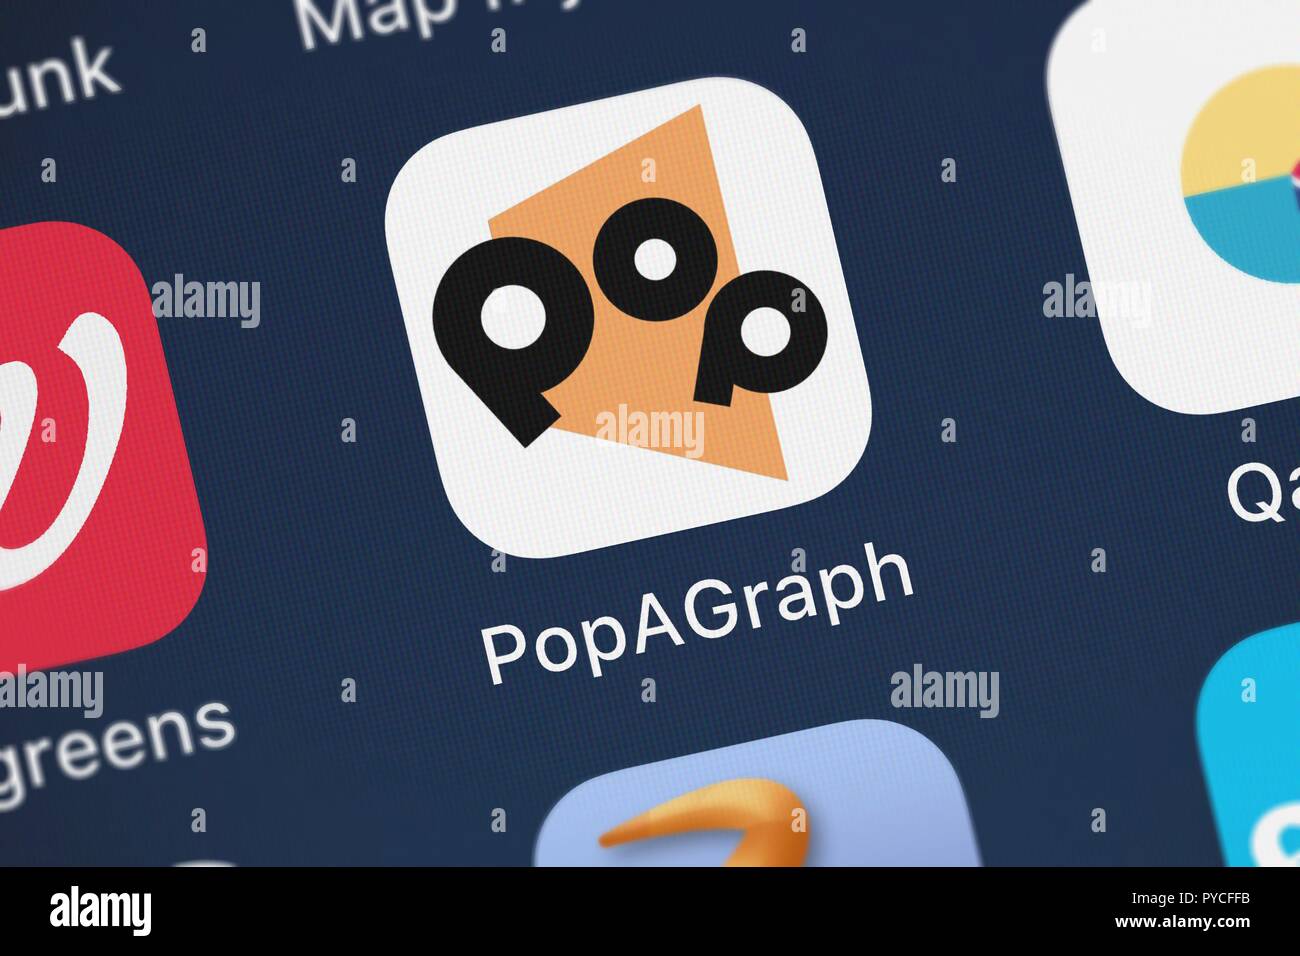 London, United Kingdom - October 26, 2018: Close-up shot of the PopAGraph mobile app from Mixcord Inc.. Stock Photo